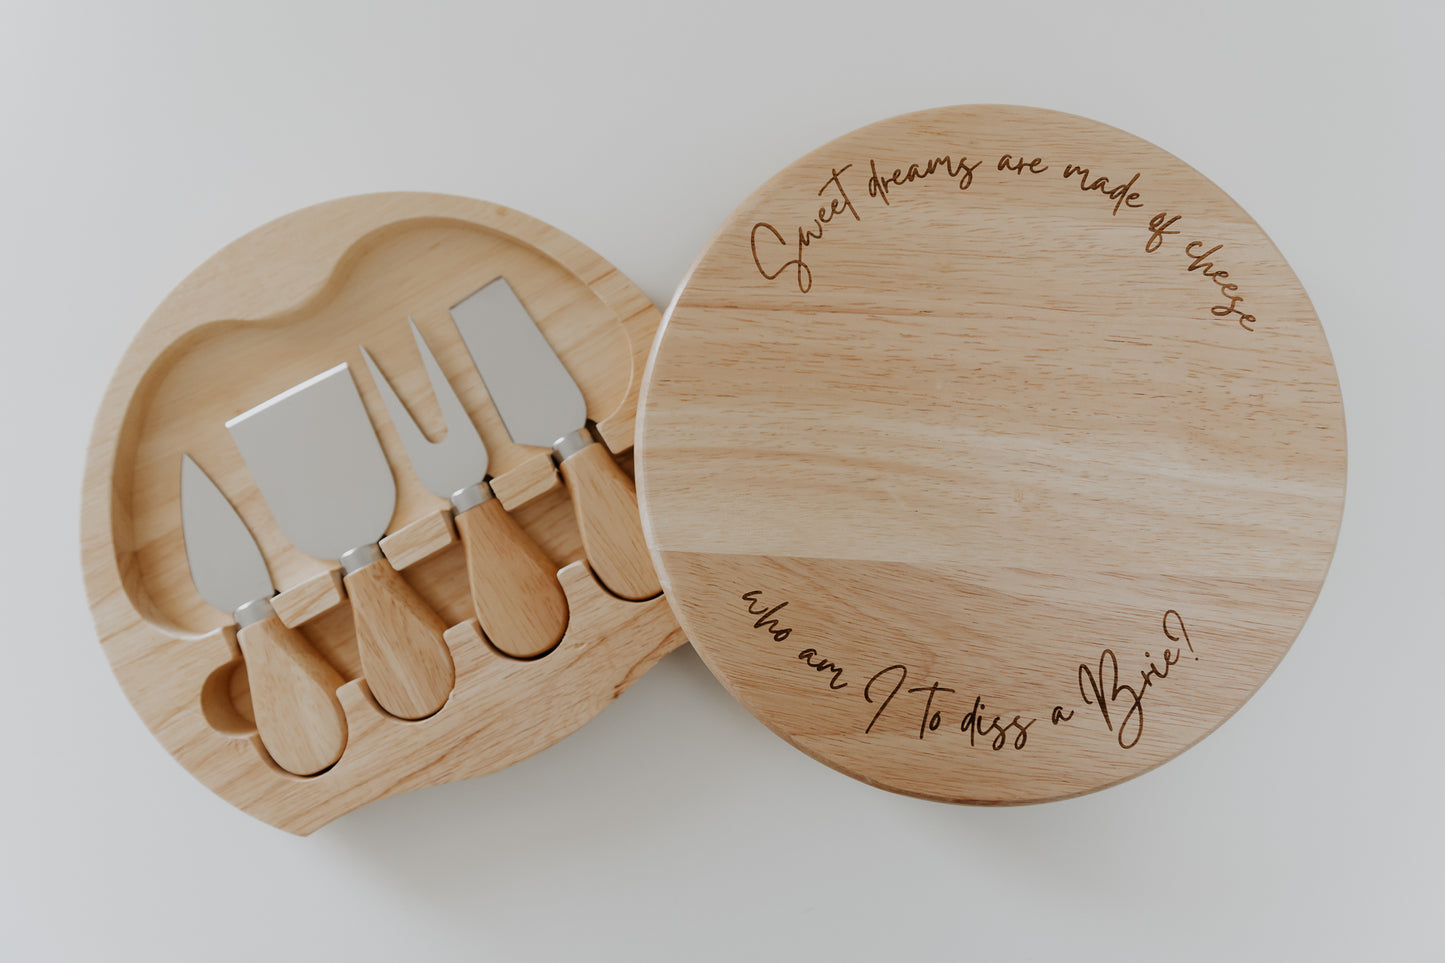 Cheesy Puns Engraved Round Cheese Board - 3 design options